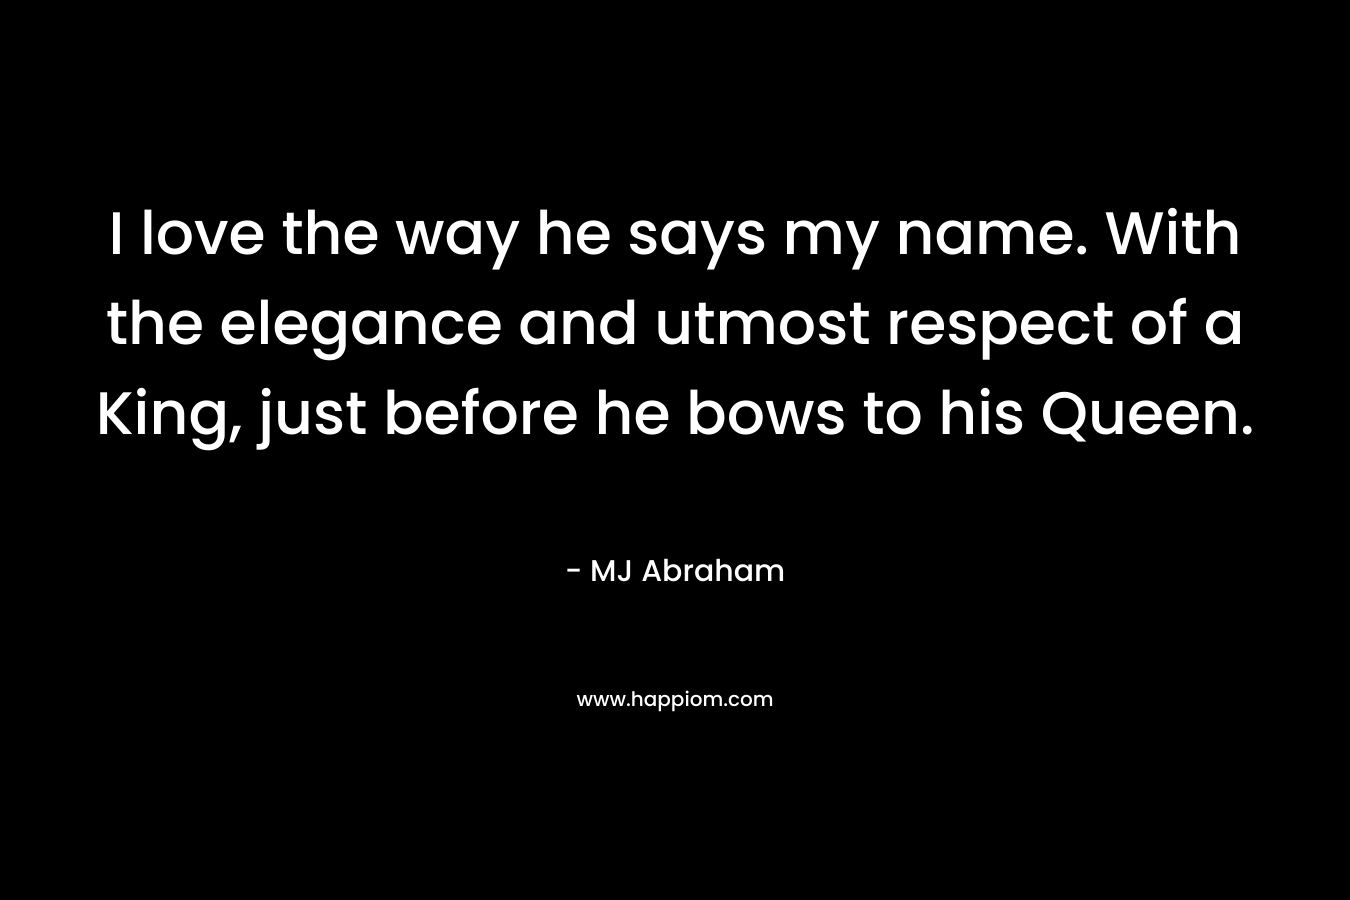 I love the way he says my name. With the elegance and utmost respect of a King, just before he bows to his Queen. – MJ Abraham